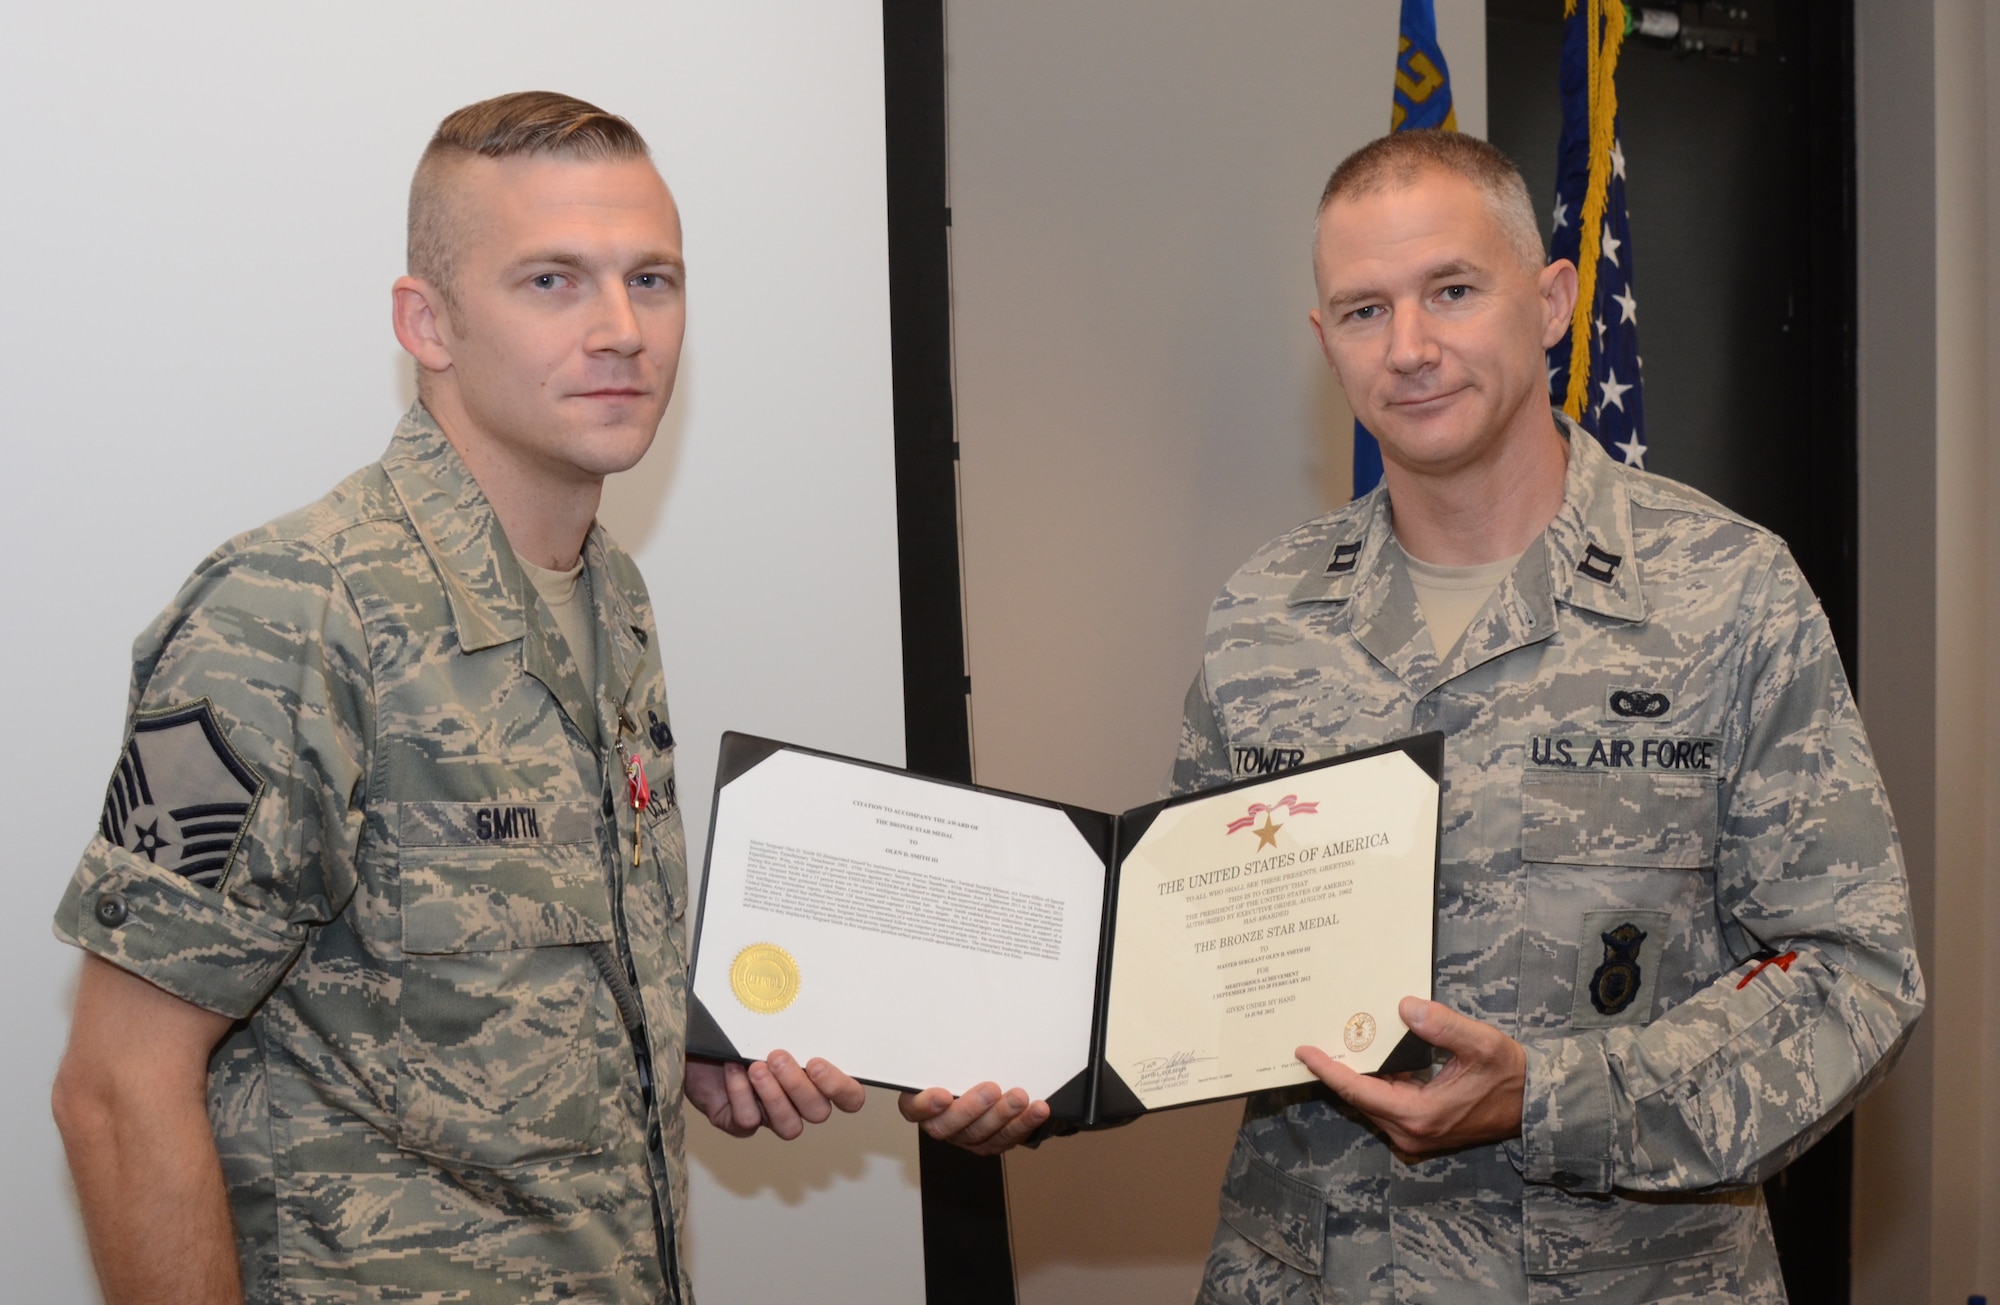 Captain Matthew Tower, commander 175th Security Forces Squadron, presents Master Sgt. Olen D. Smith III, 175th Security Forces Squadron, with the certificate for the Bronze Star Medal.  Smith was presented the award on August 12, 2012 at Warfield Air National Guard Base for his duty in Bagram, Afghanistan. (National Guard photo by TSgt. Chris Schepers)